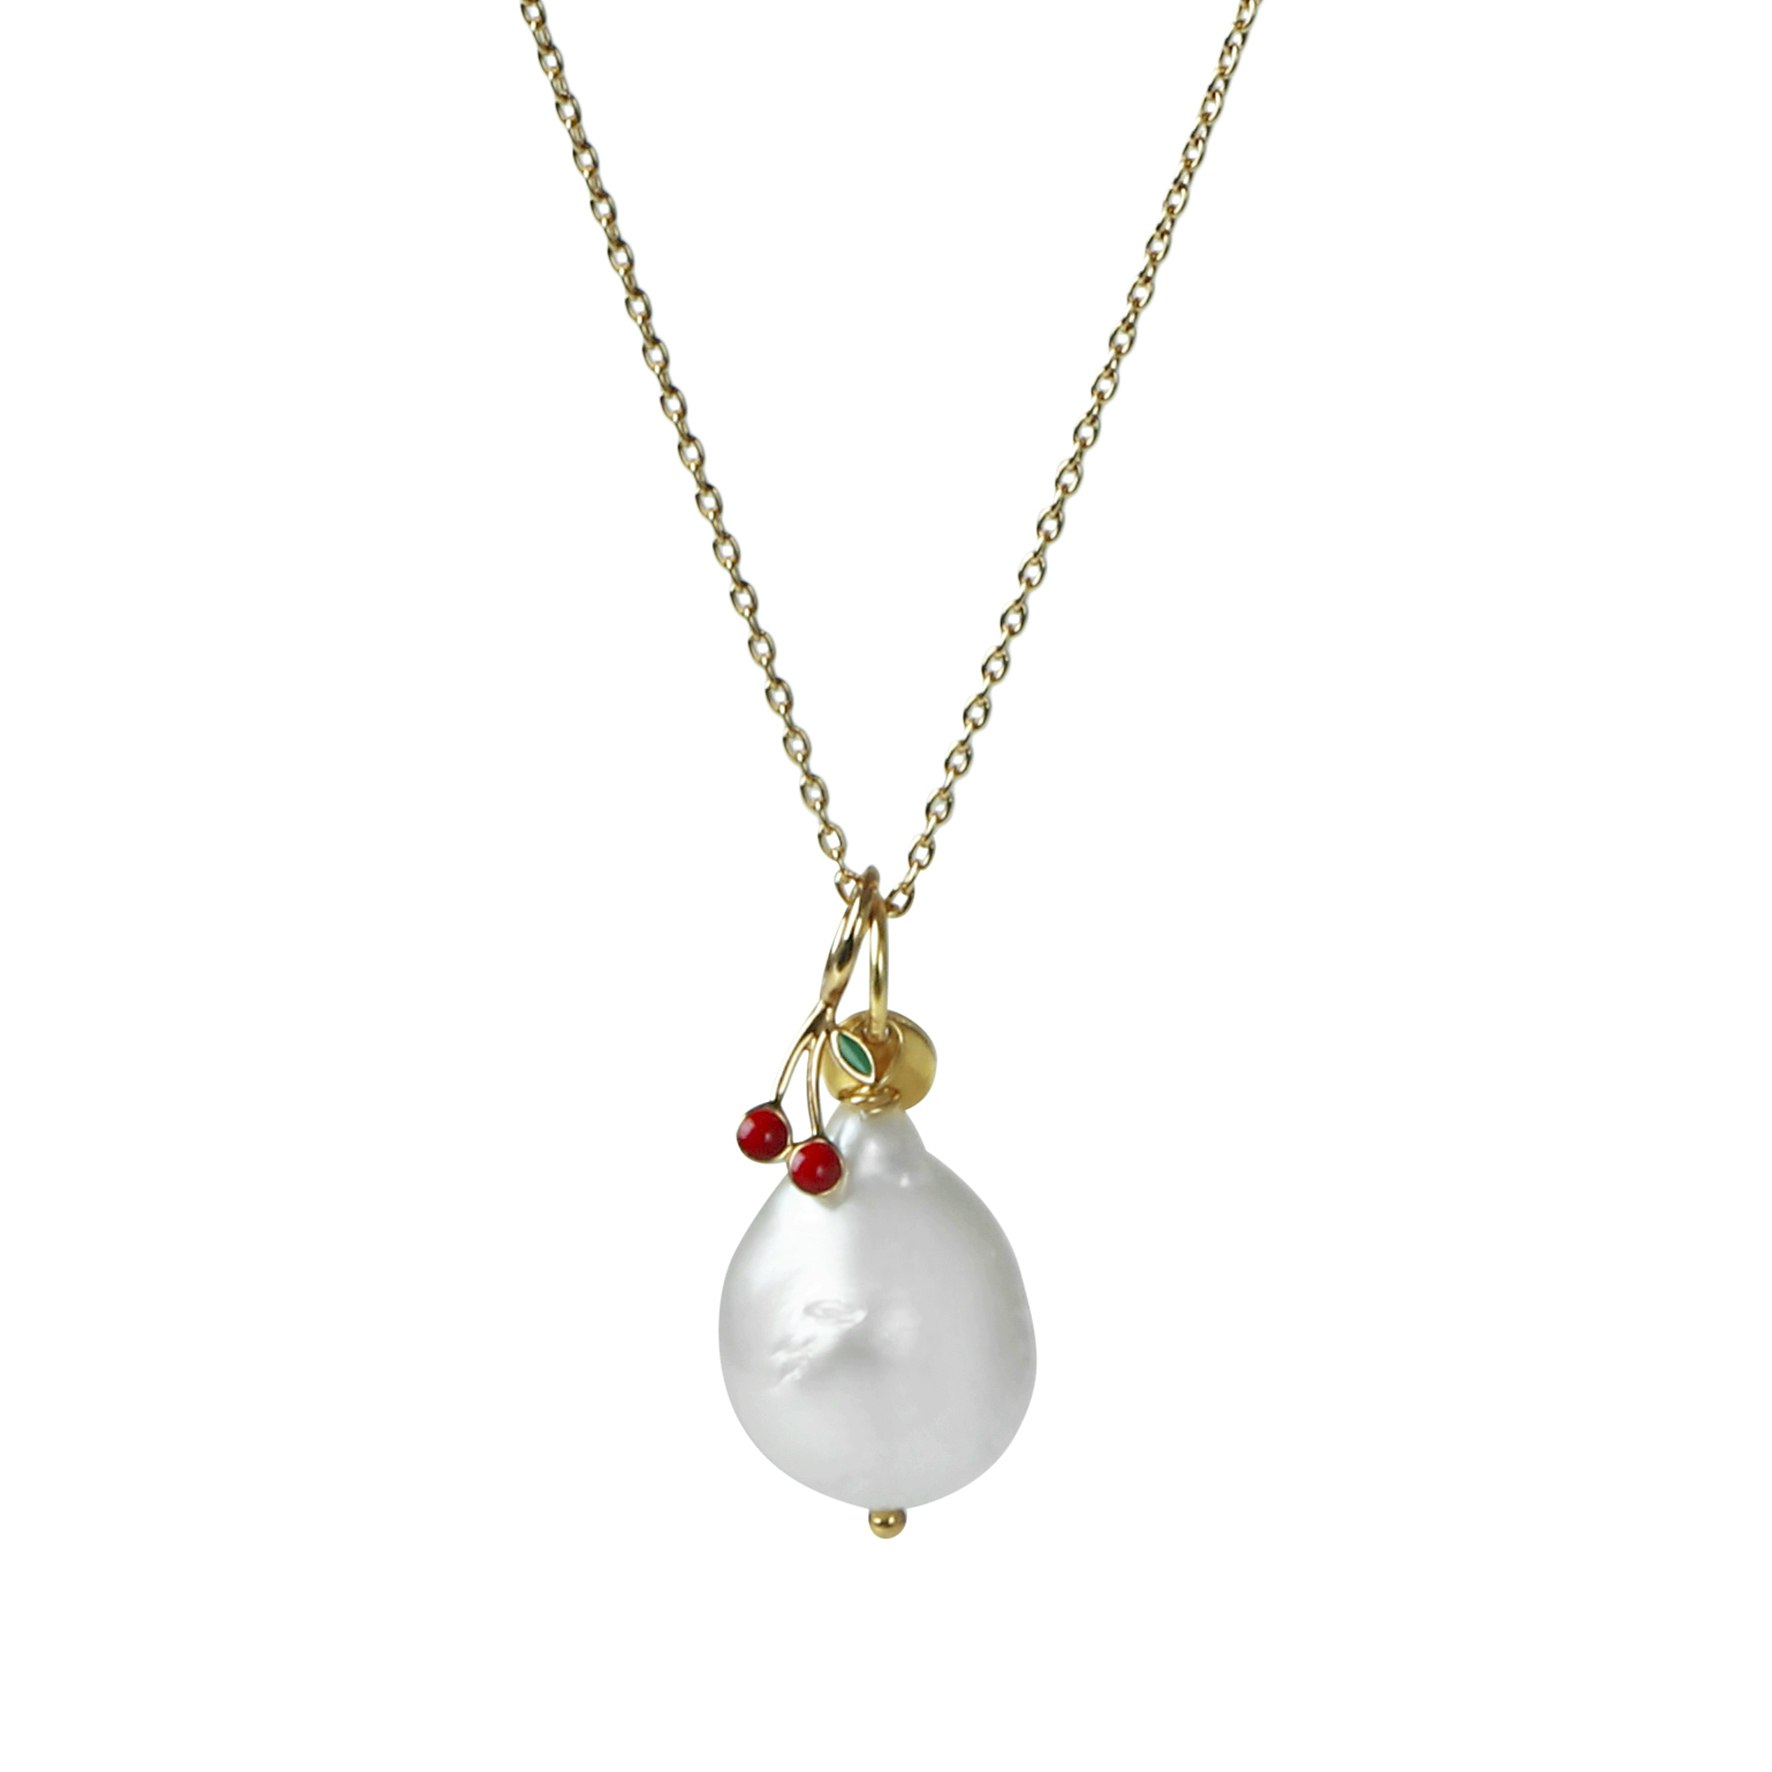 Baroque Pearl Pendant from STINE A Jewelry in Goldplated Silver Sterling 925